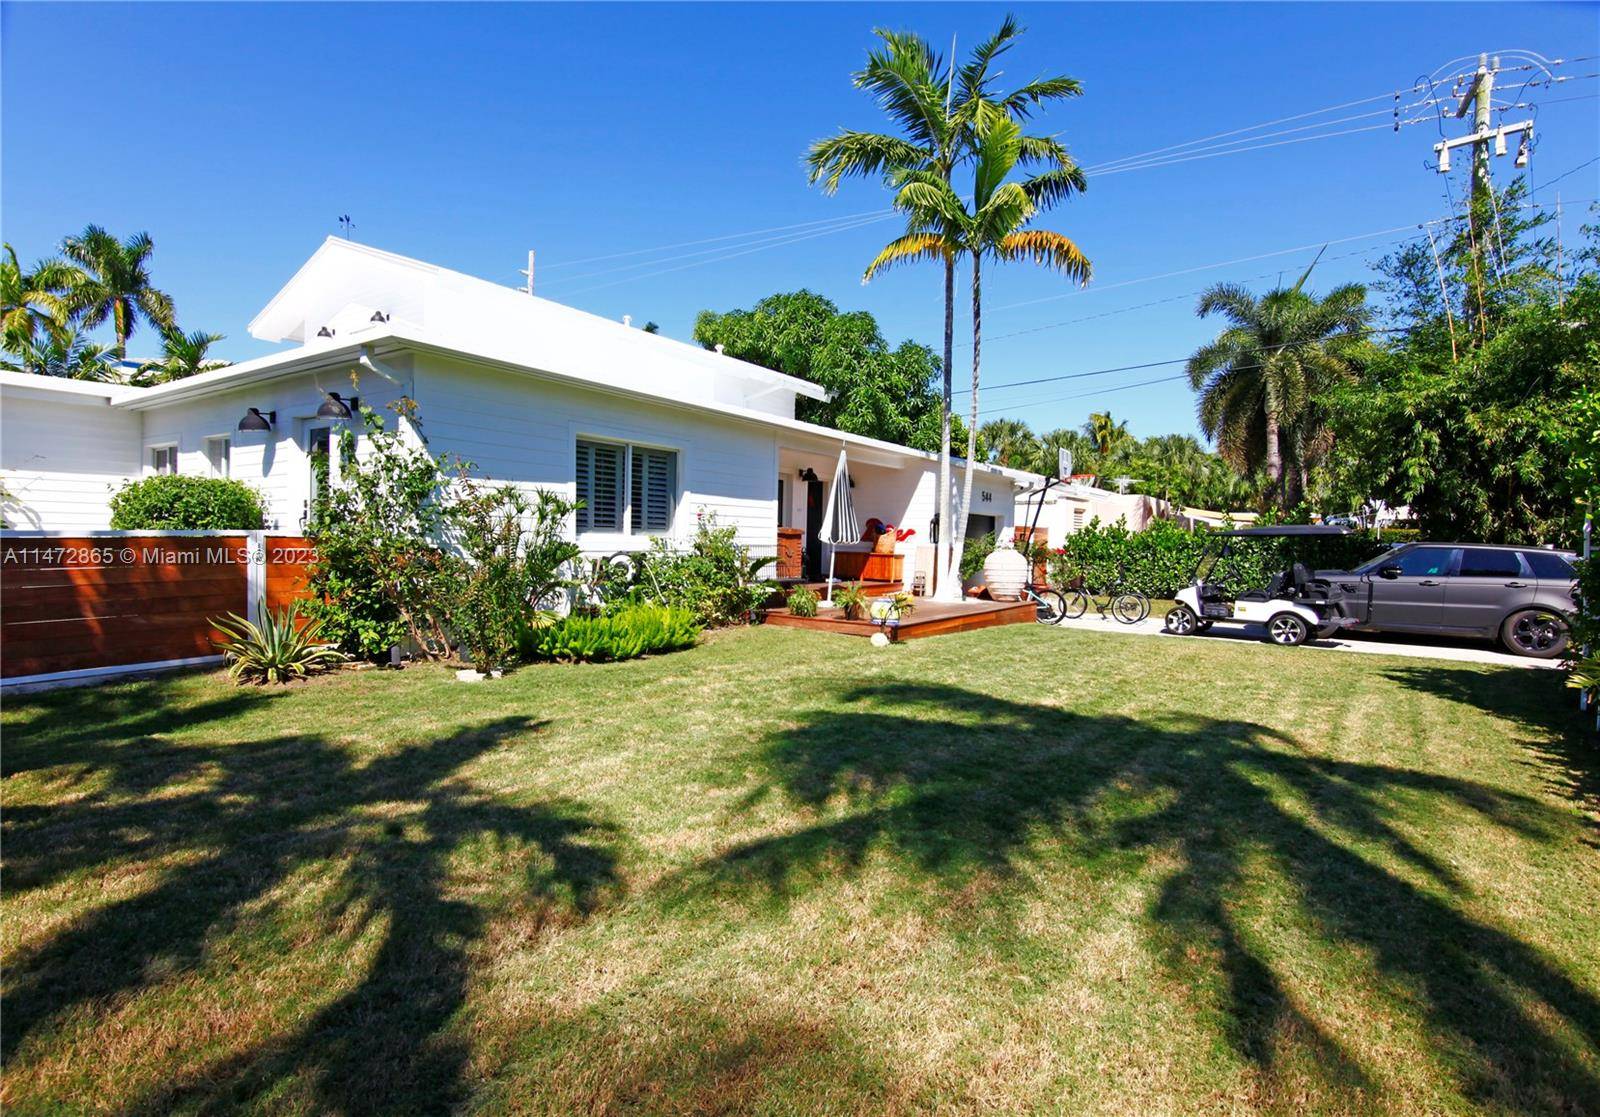 NEW 2900SF Discover the epitome of a Key Biscayne Villa with three bedrooms, three and a half baths, Italian custom wood flooring, Ipe decking encompassing the entire property, a gas ...